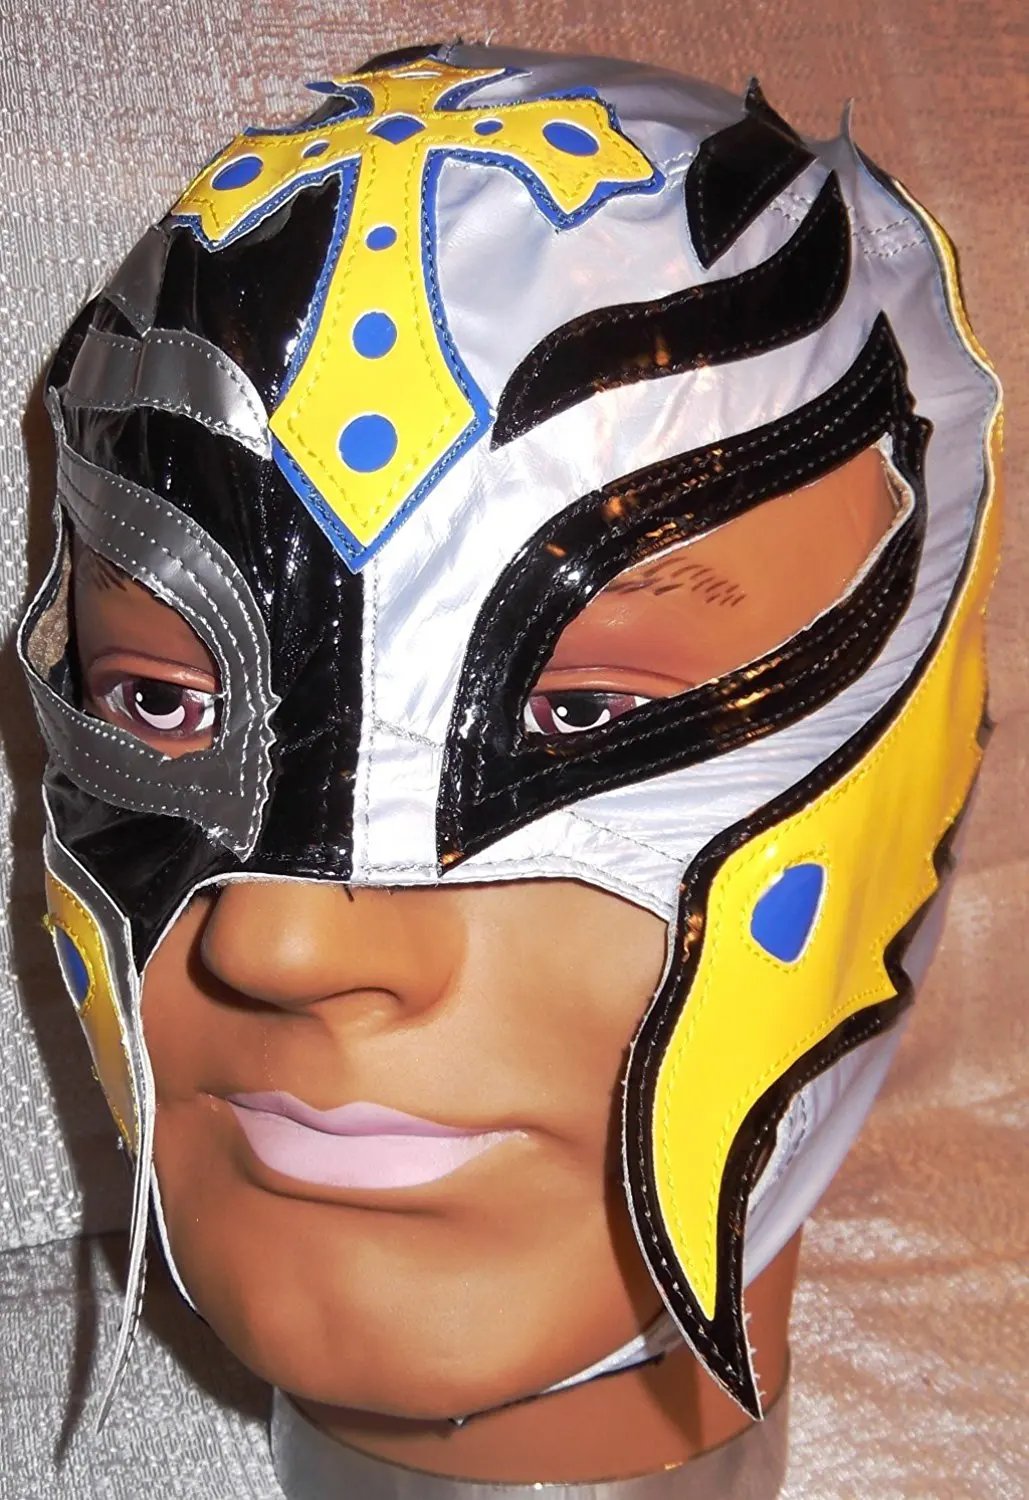 Buy Wwe Official Rey Mysterio Youth Size Green Black Wrestling Mask Licensed In Cheap Price On Alibaba Com